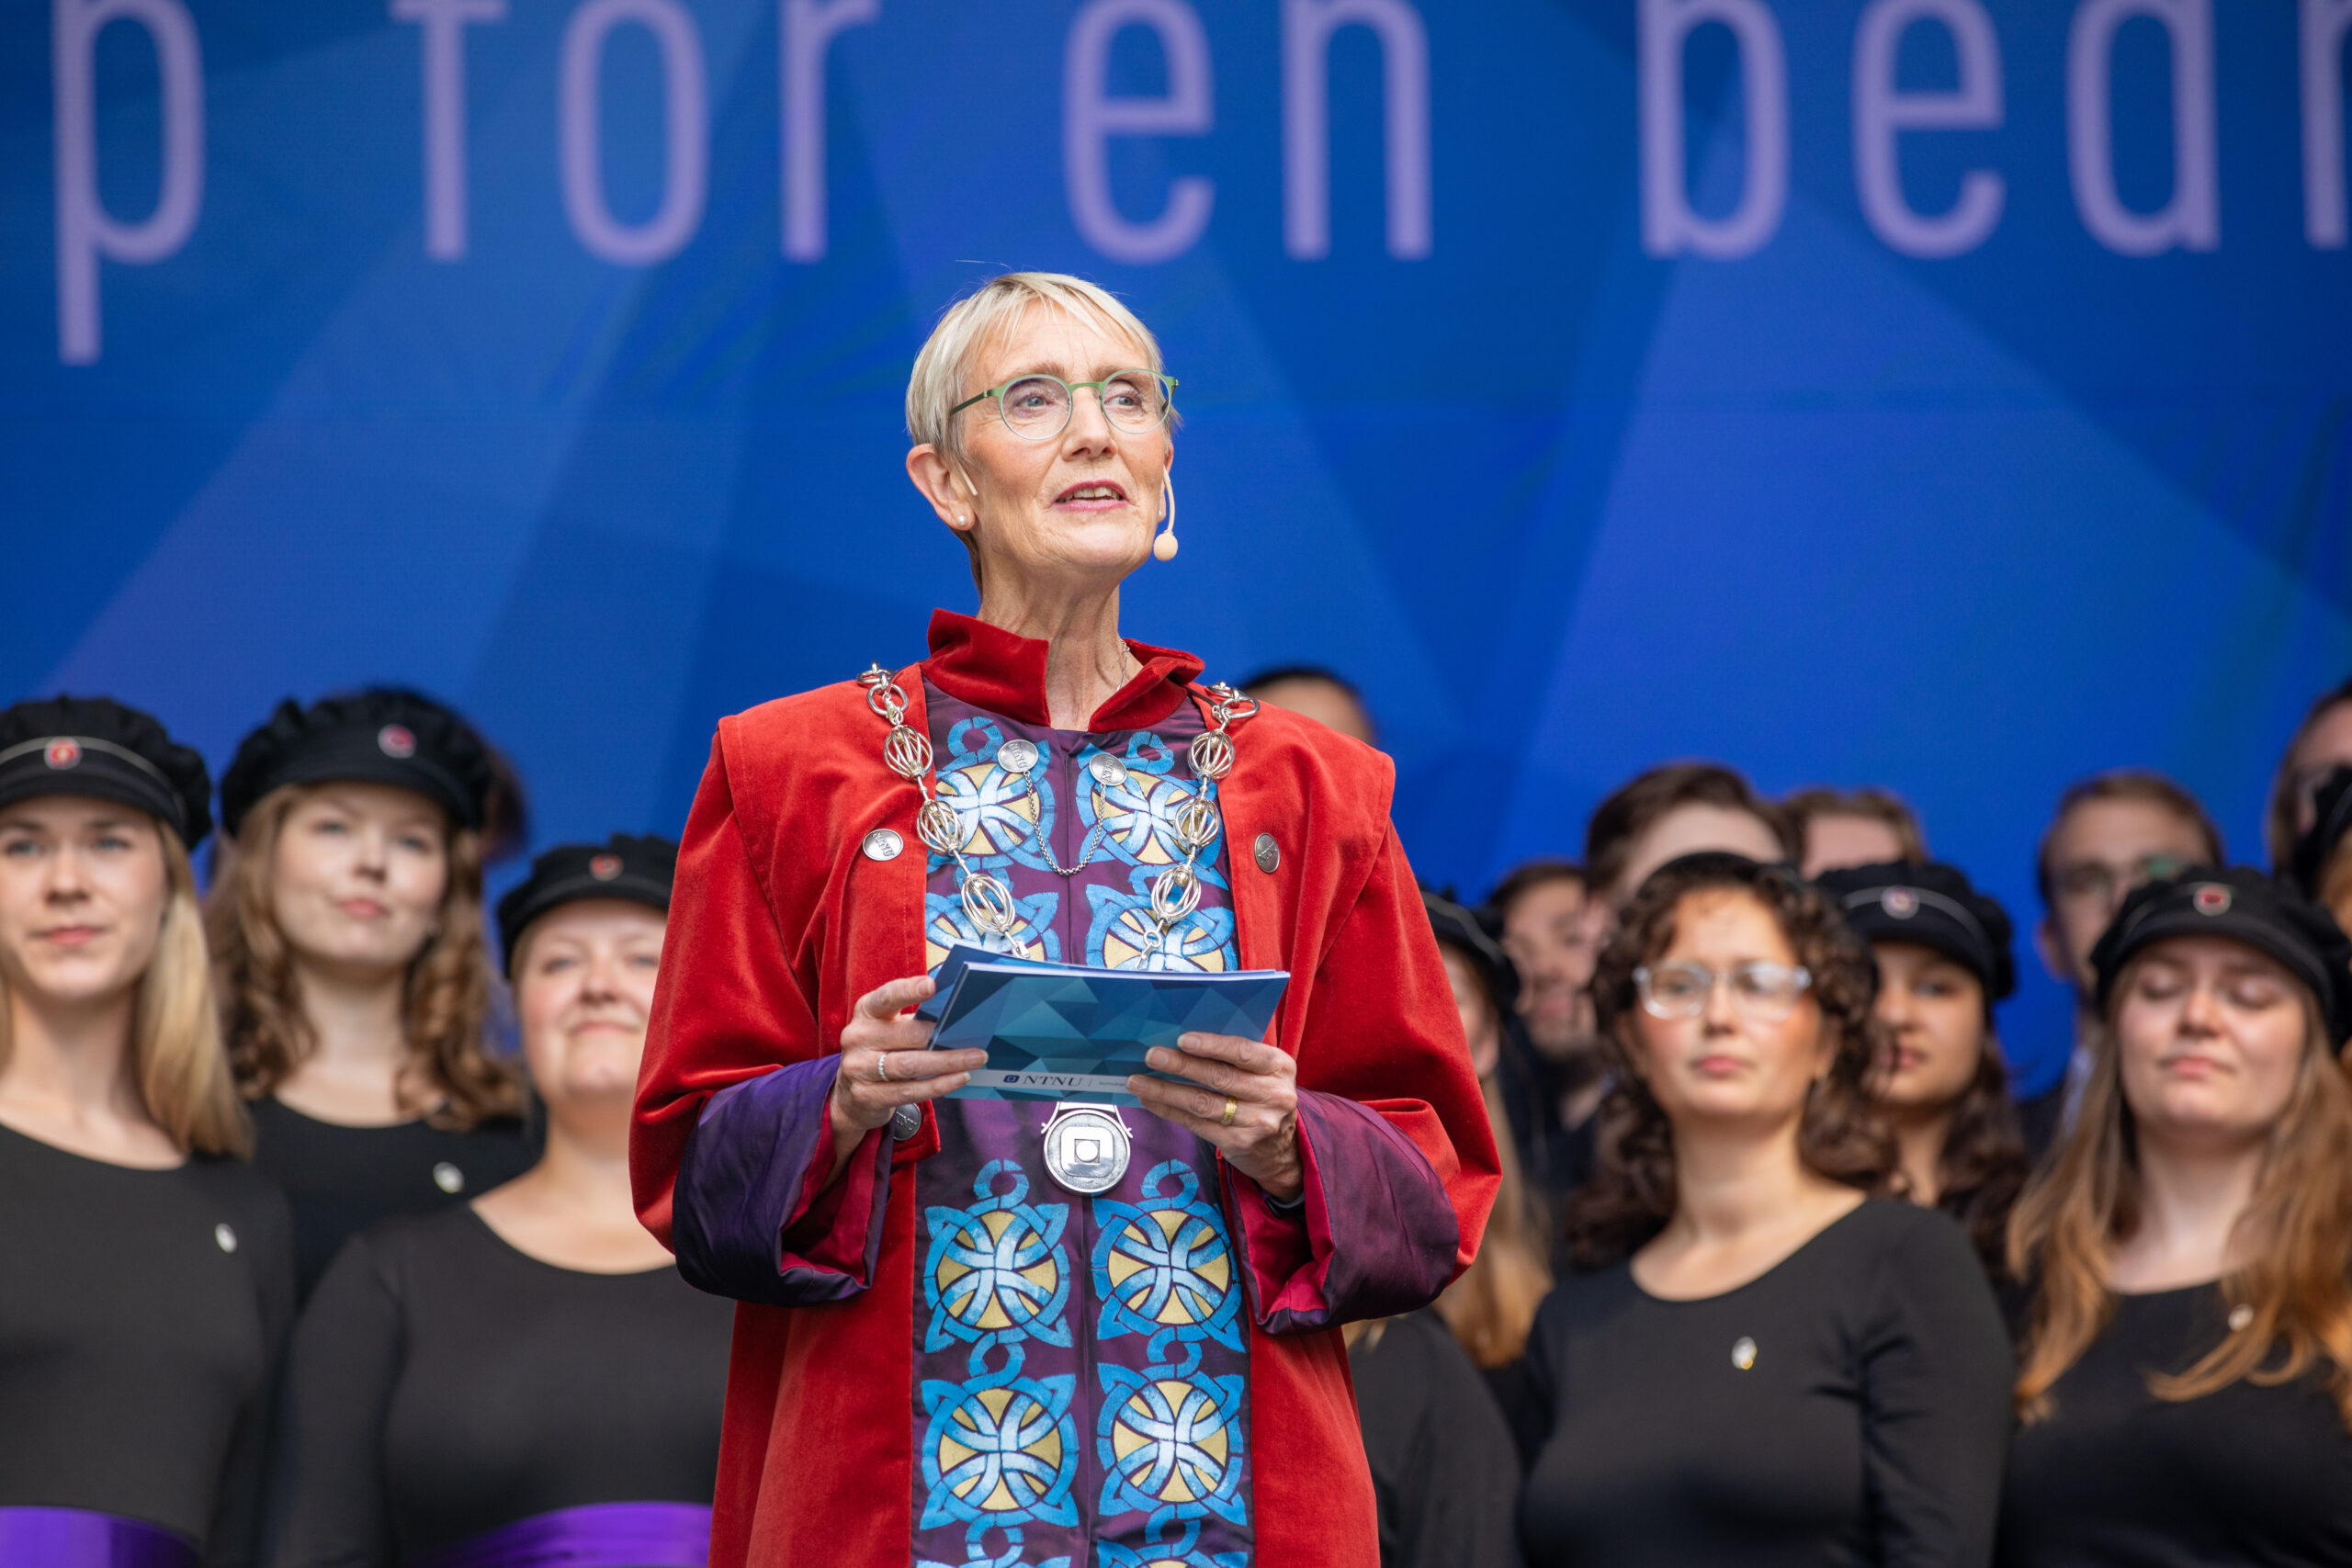 Rector Anne Borg on stage during the ceremony